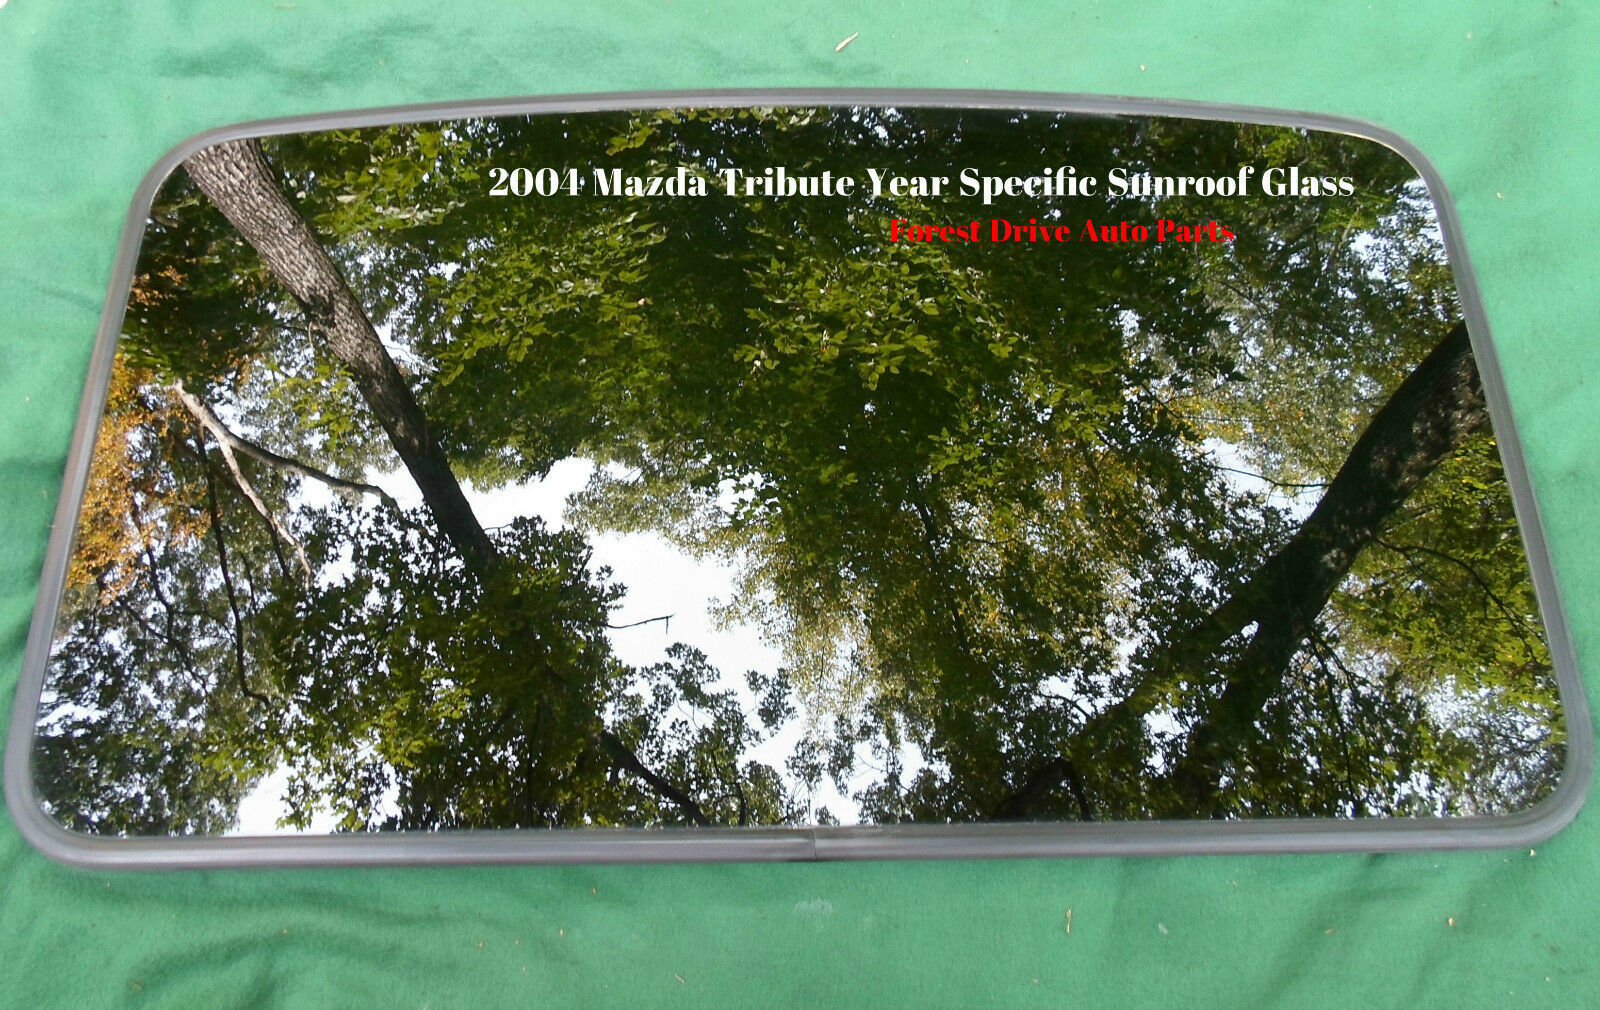 2004 MAZDA TRIBUTE YEAR SPECIFIC SUNROOF GLASS PANEL OEM FREE SHIPPING! - $180.00